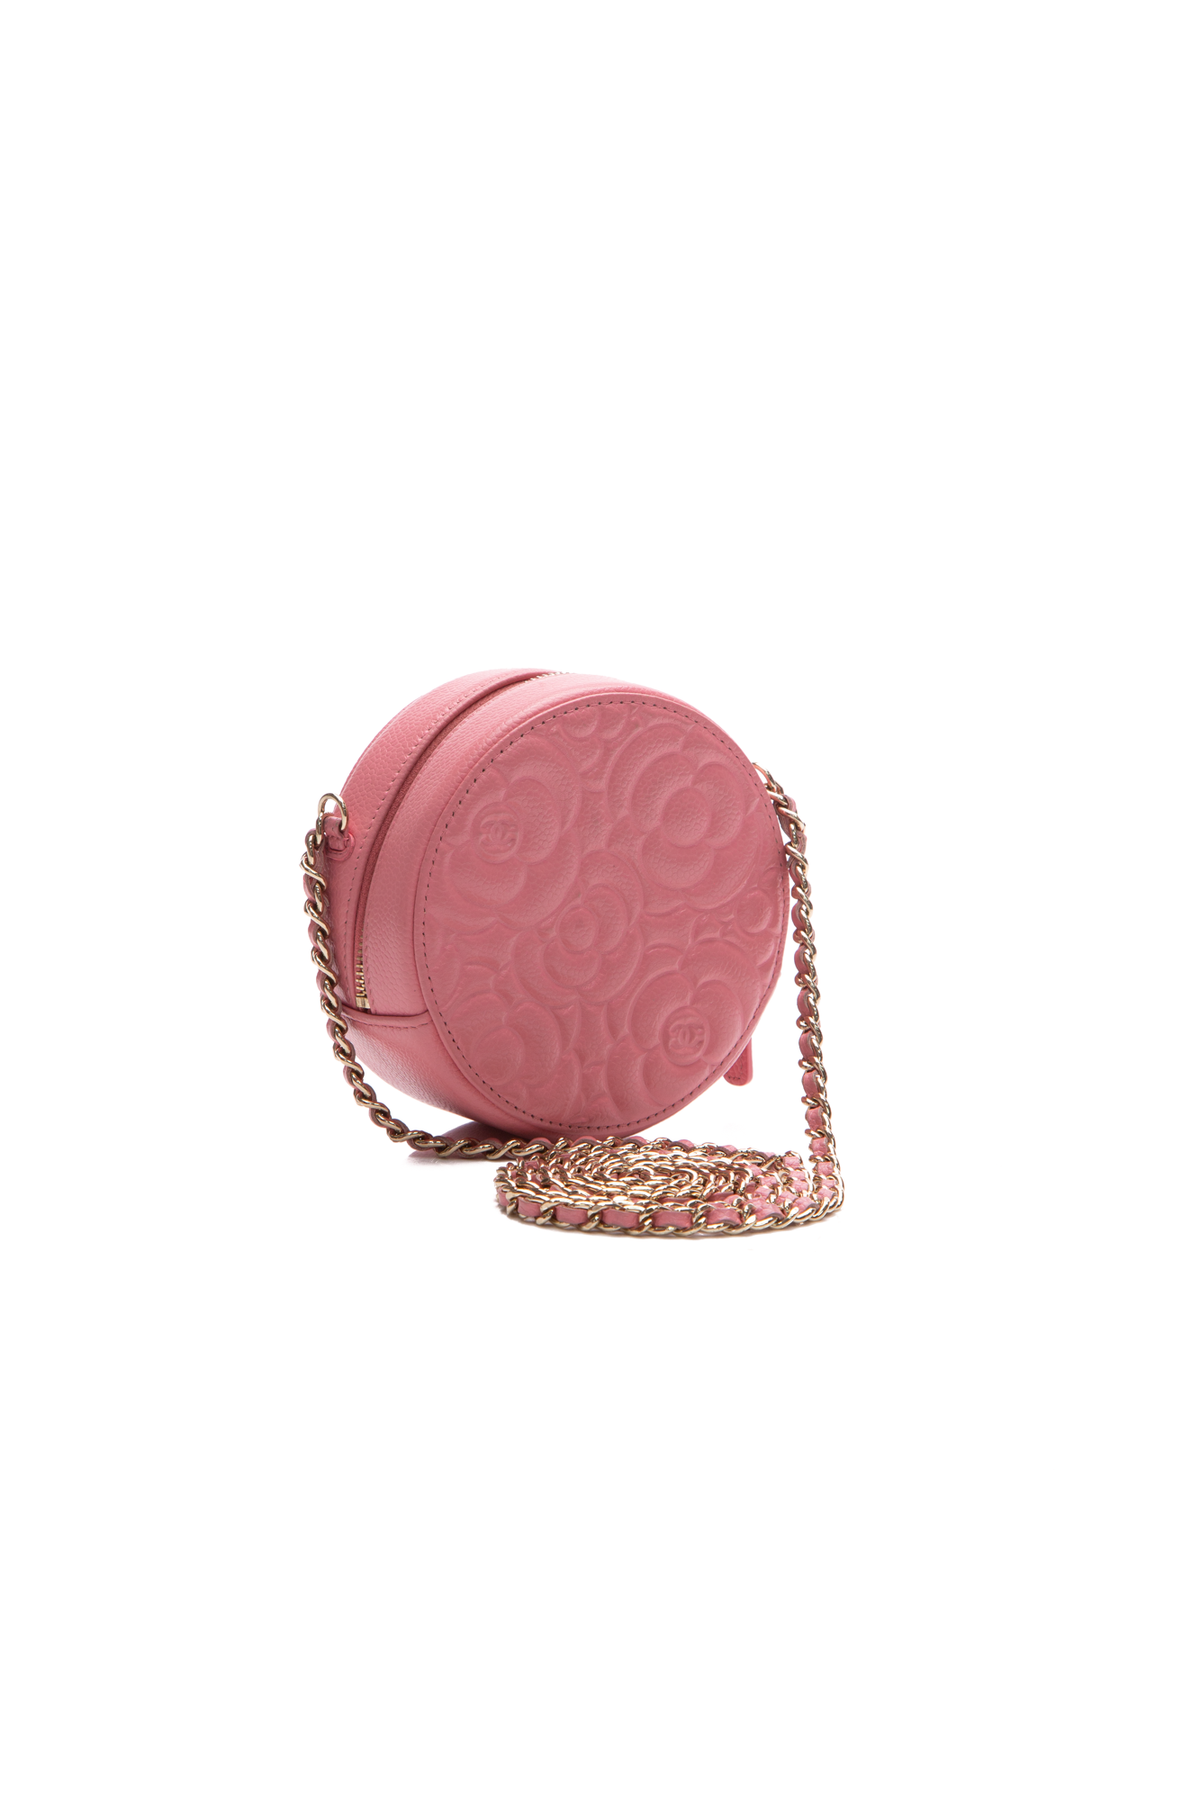 Chanel Camellia Round Clutch with Chain Bag